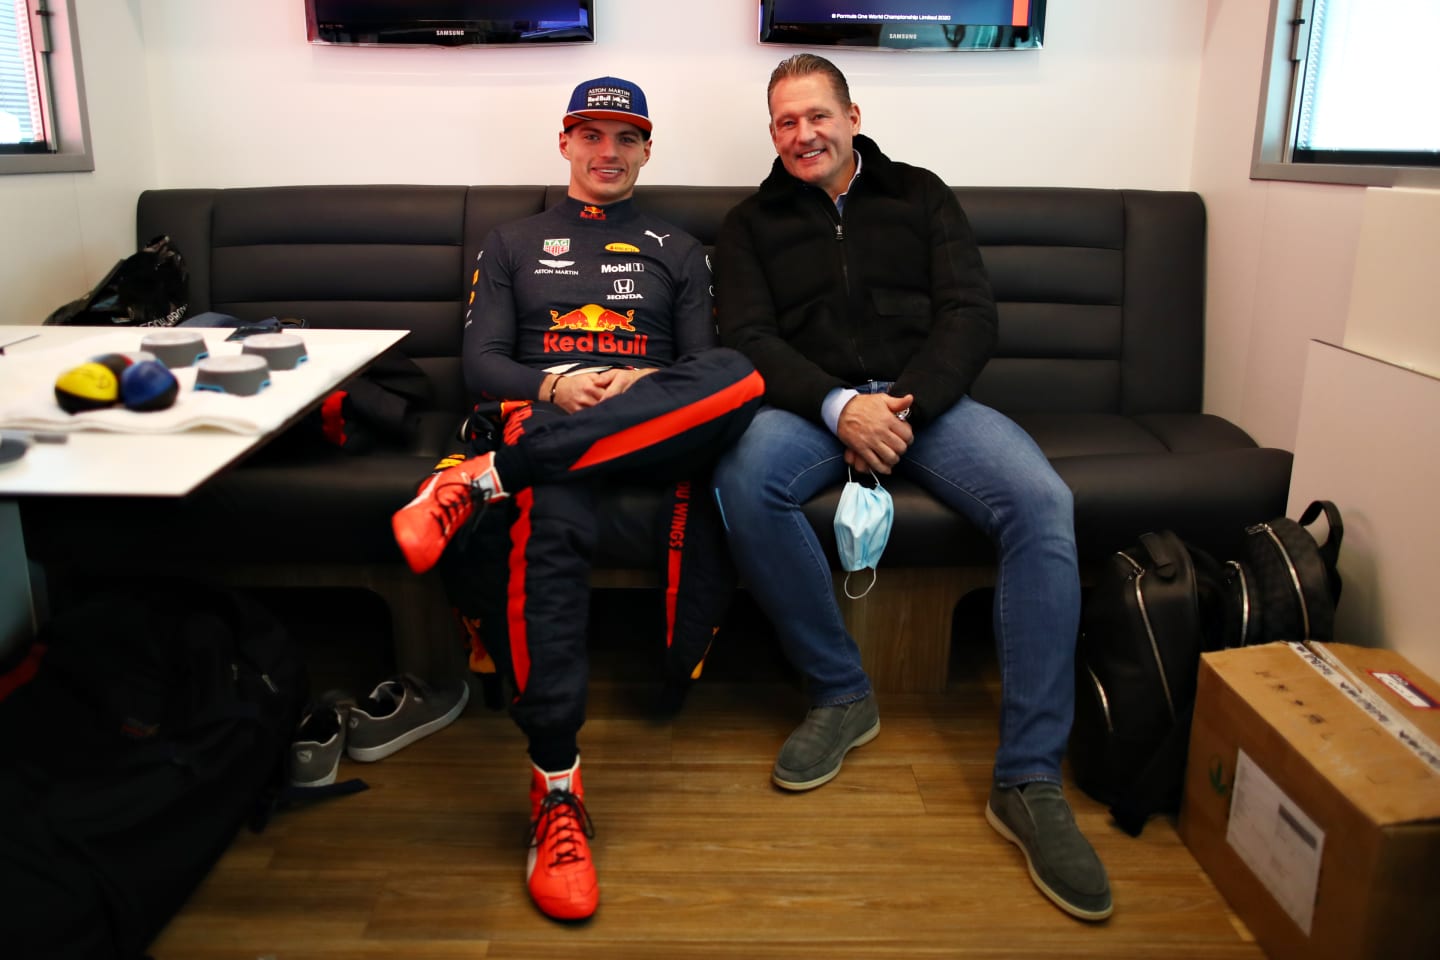 NUERBURG, GERMANY - OCTOBER 10: Max Verstappen of Netherlands and Red Bull Racing and his father